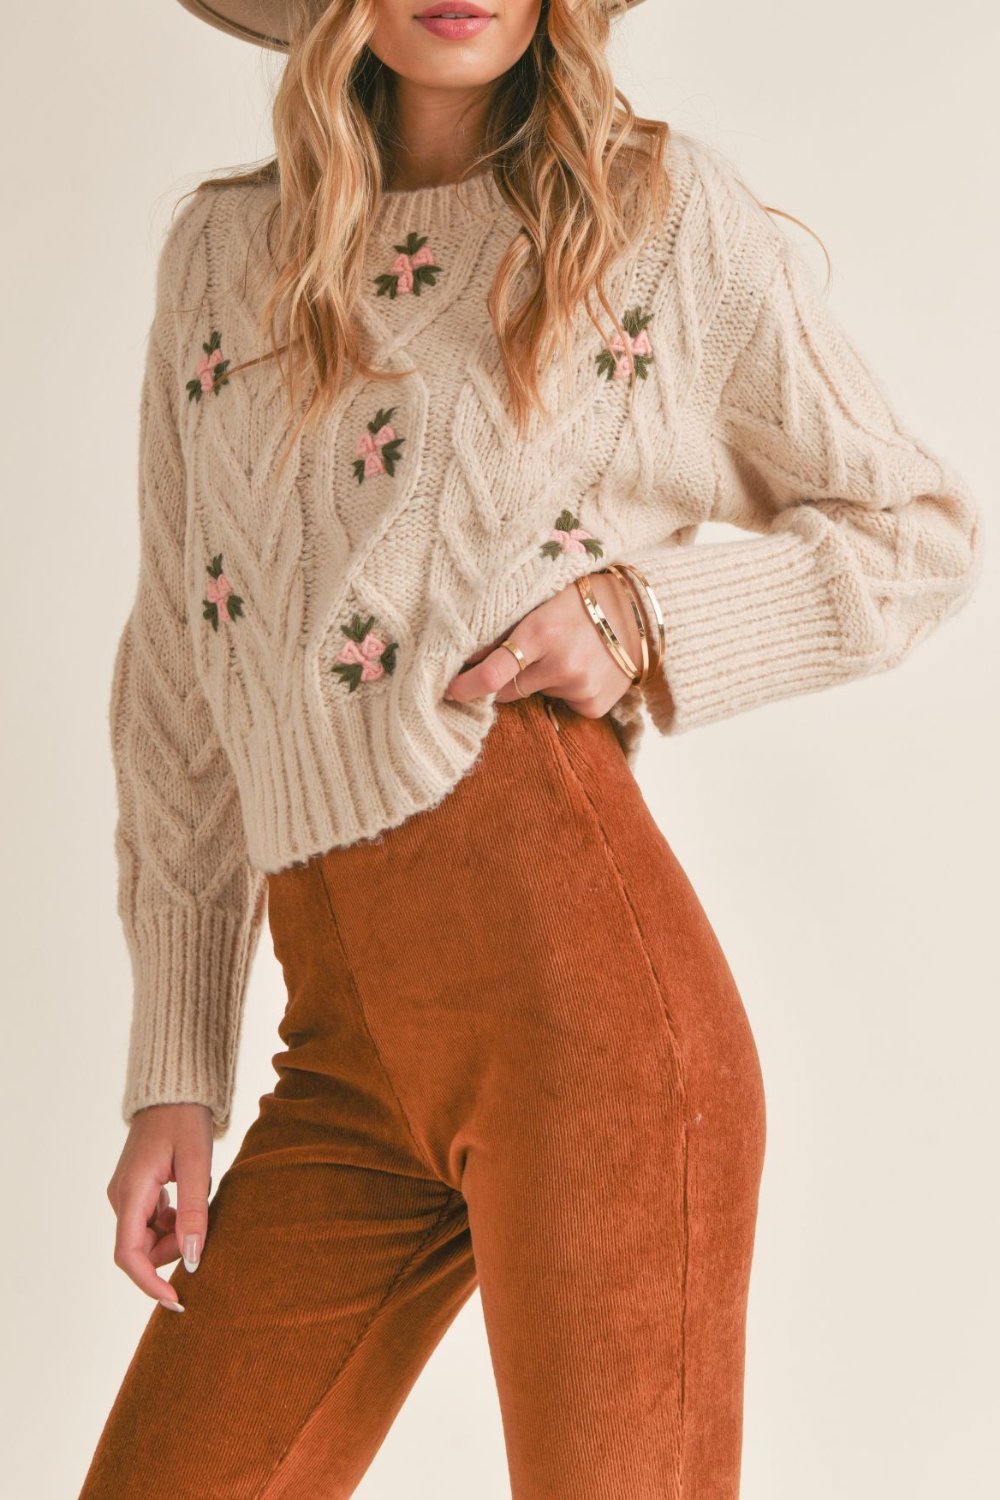 Women's Parisian Style Floral Knit Sweater Top | Beige - Women's Sweaters - Blooming Daily